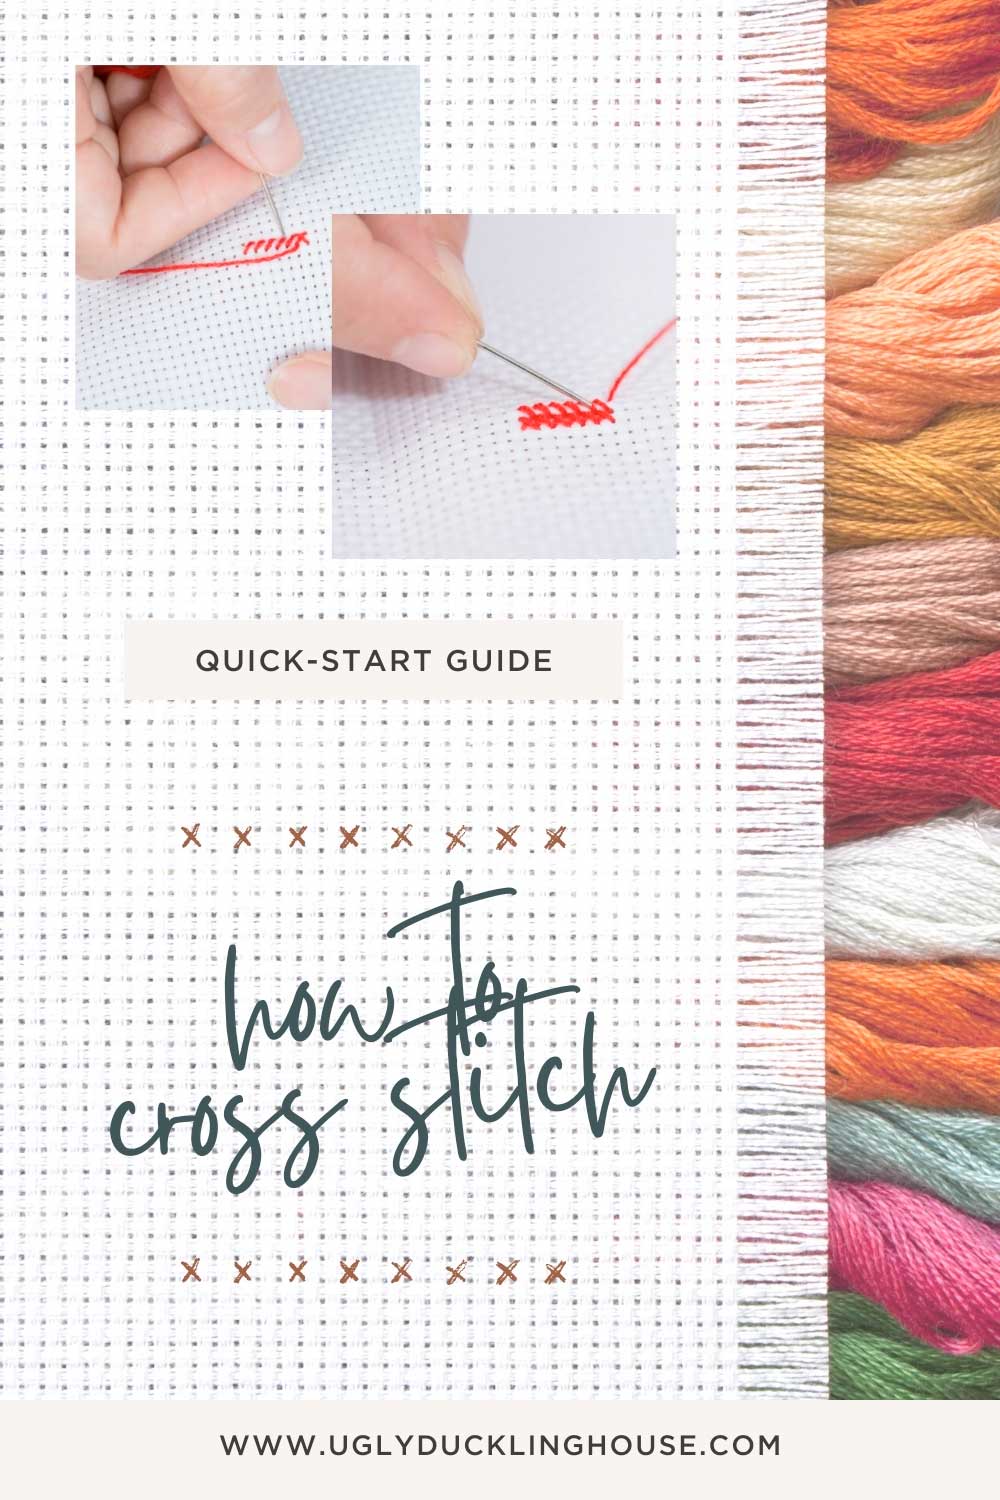 Cross Stitching for Beginner's Guide: Simple Practical Guide To Cross  Stitch For Beginners (Paperback)